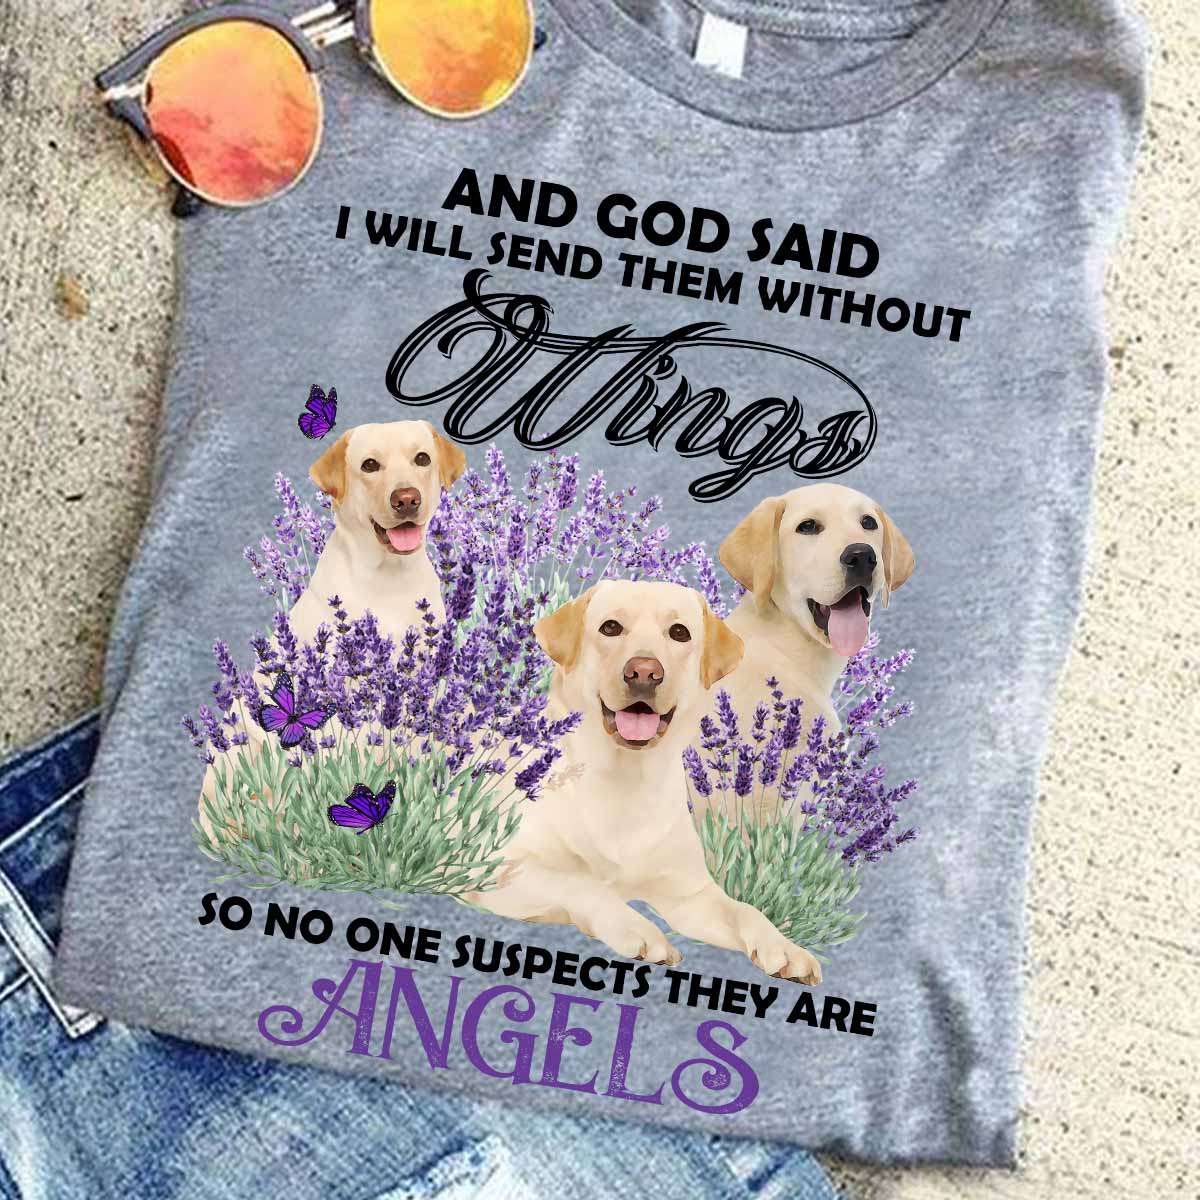 Labrador retriever - And god said i will send them without wings so no one suspects they are angles